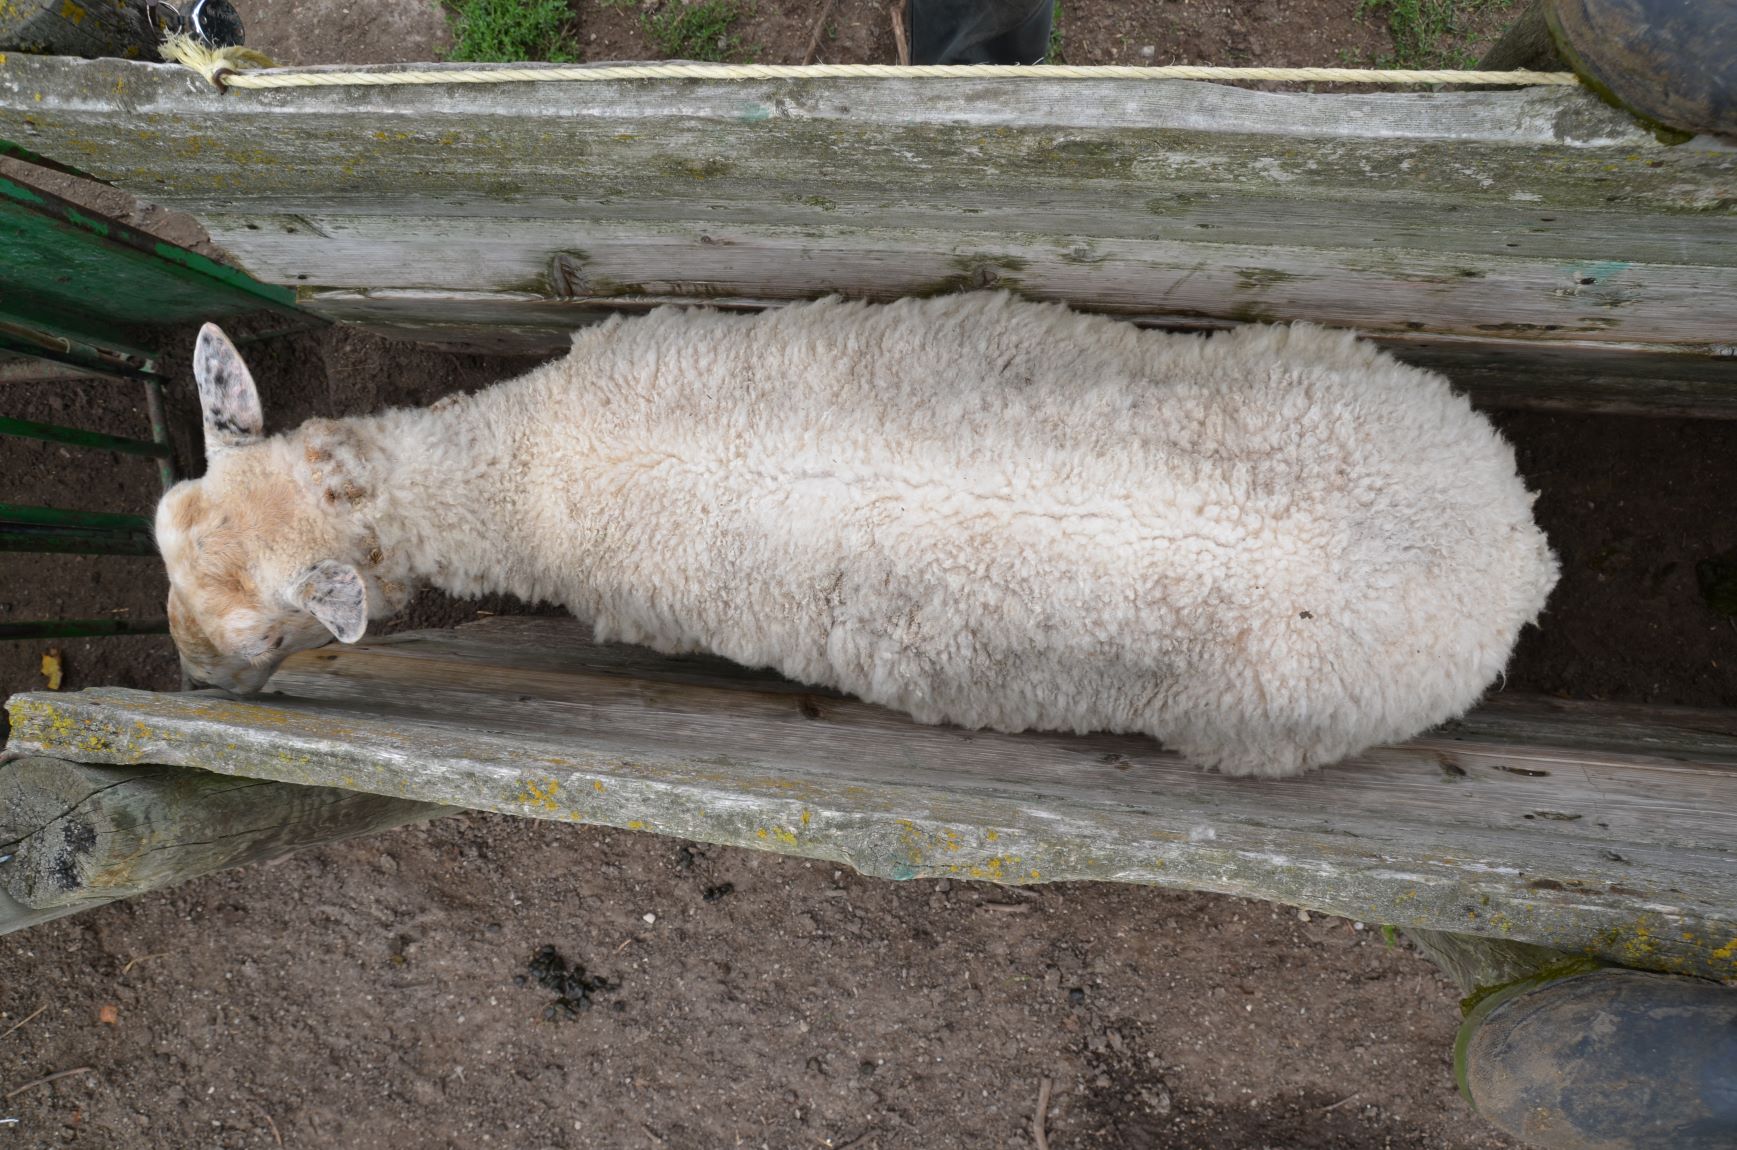 Overhead view of a sheep with a body condition score of 2.